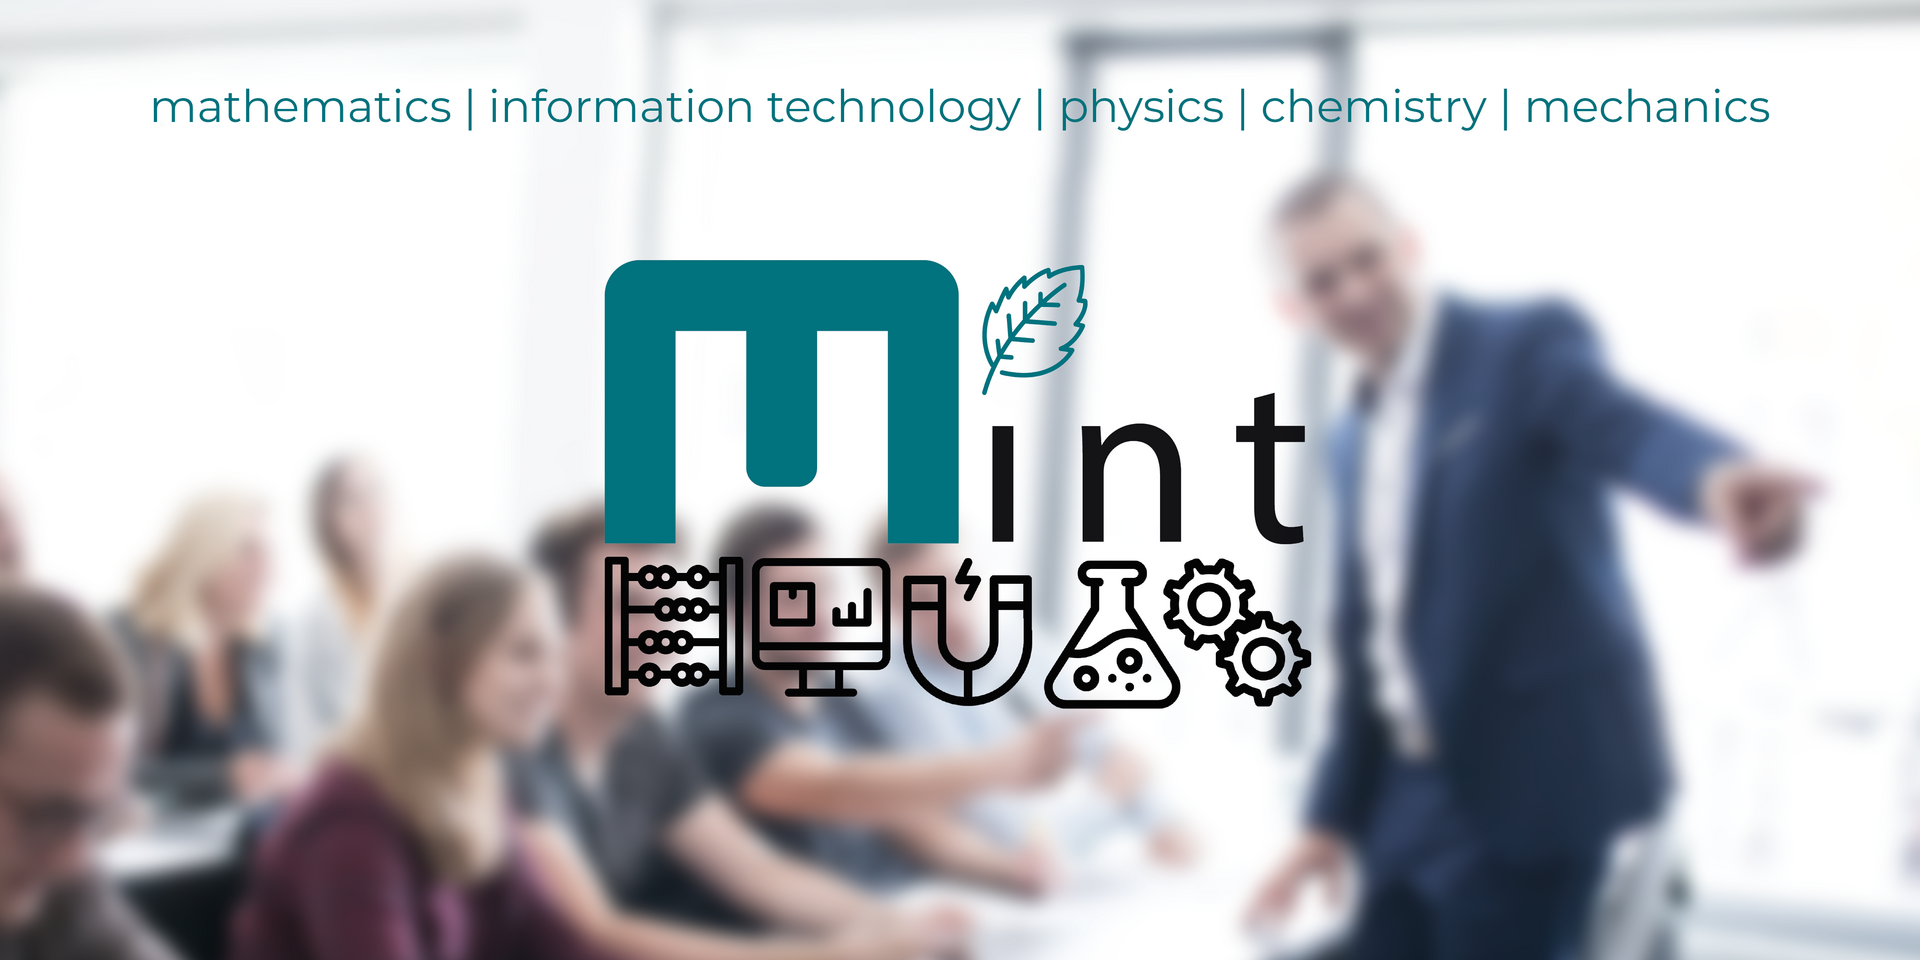 A MINT or STEM graphic about the fields of mathematics, computer science, natural sciences and technology